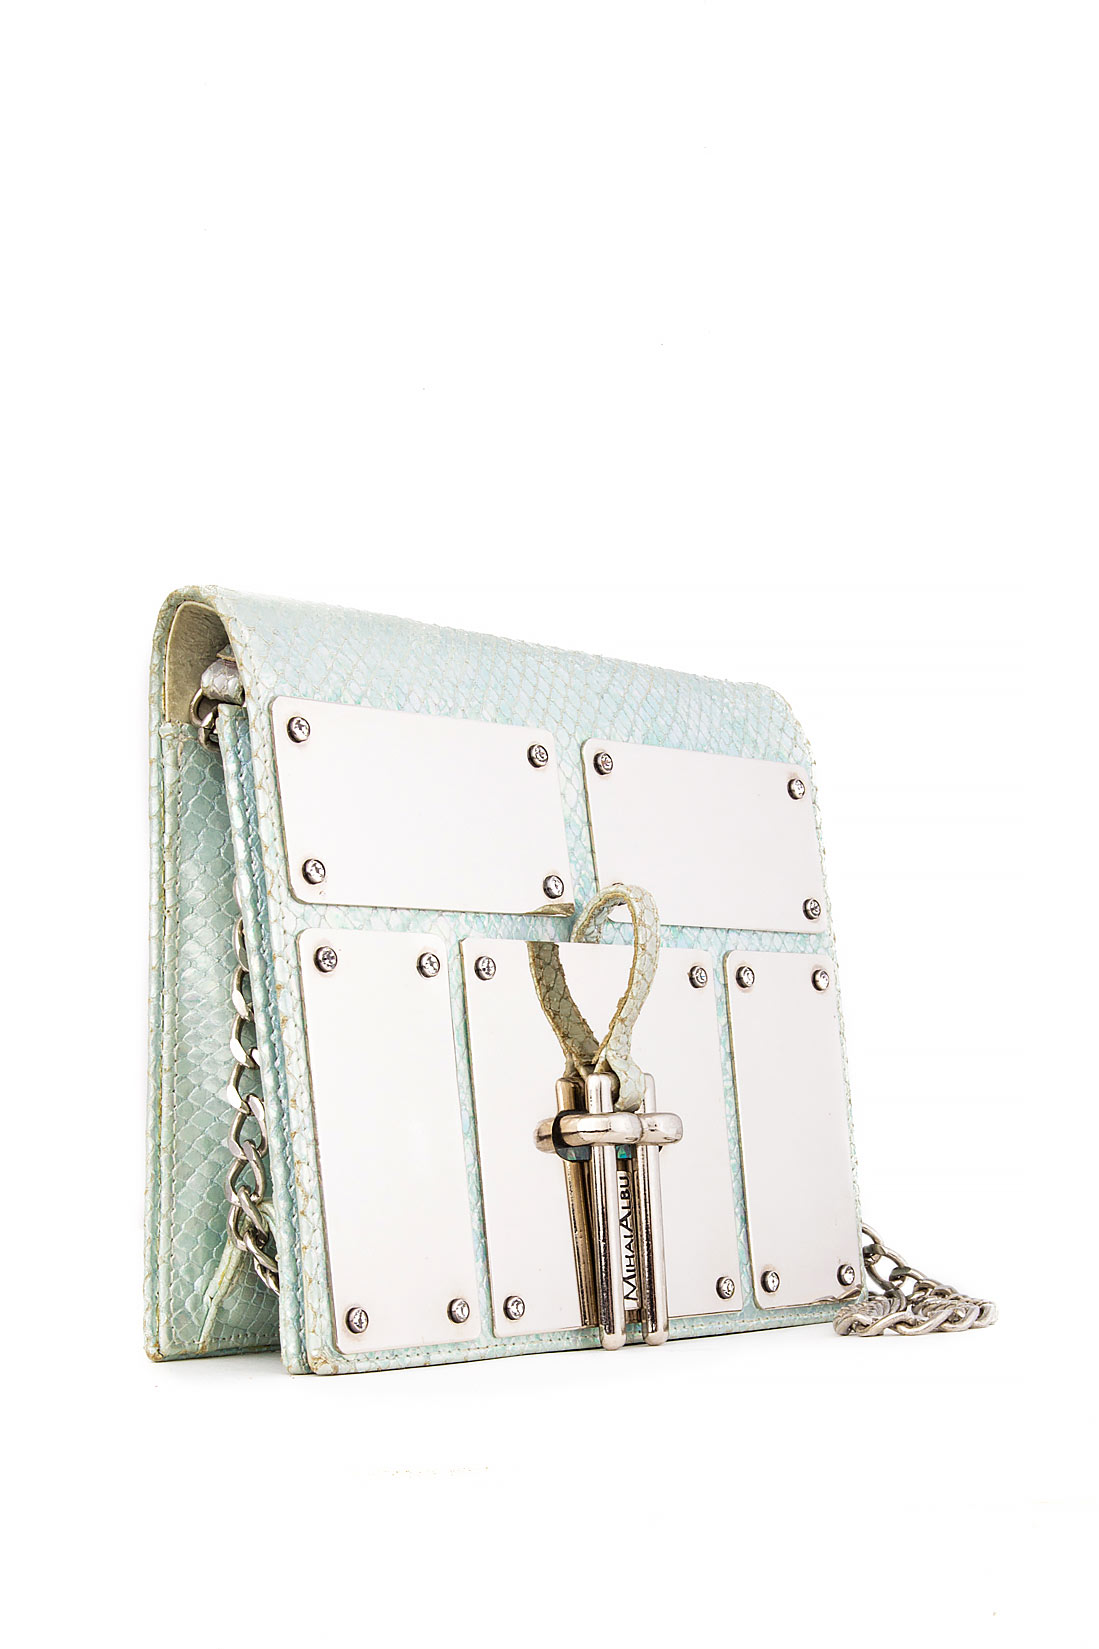 Textured-leather clutch embossed with metallic mirrors Mihai Albu image 1